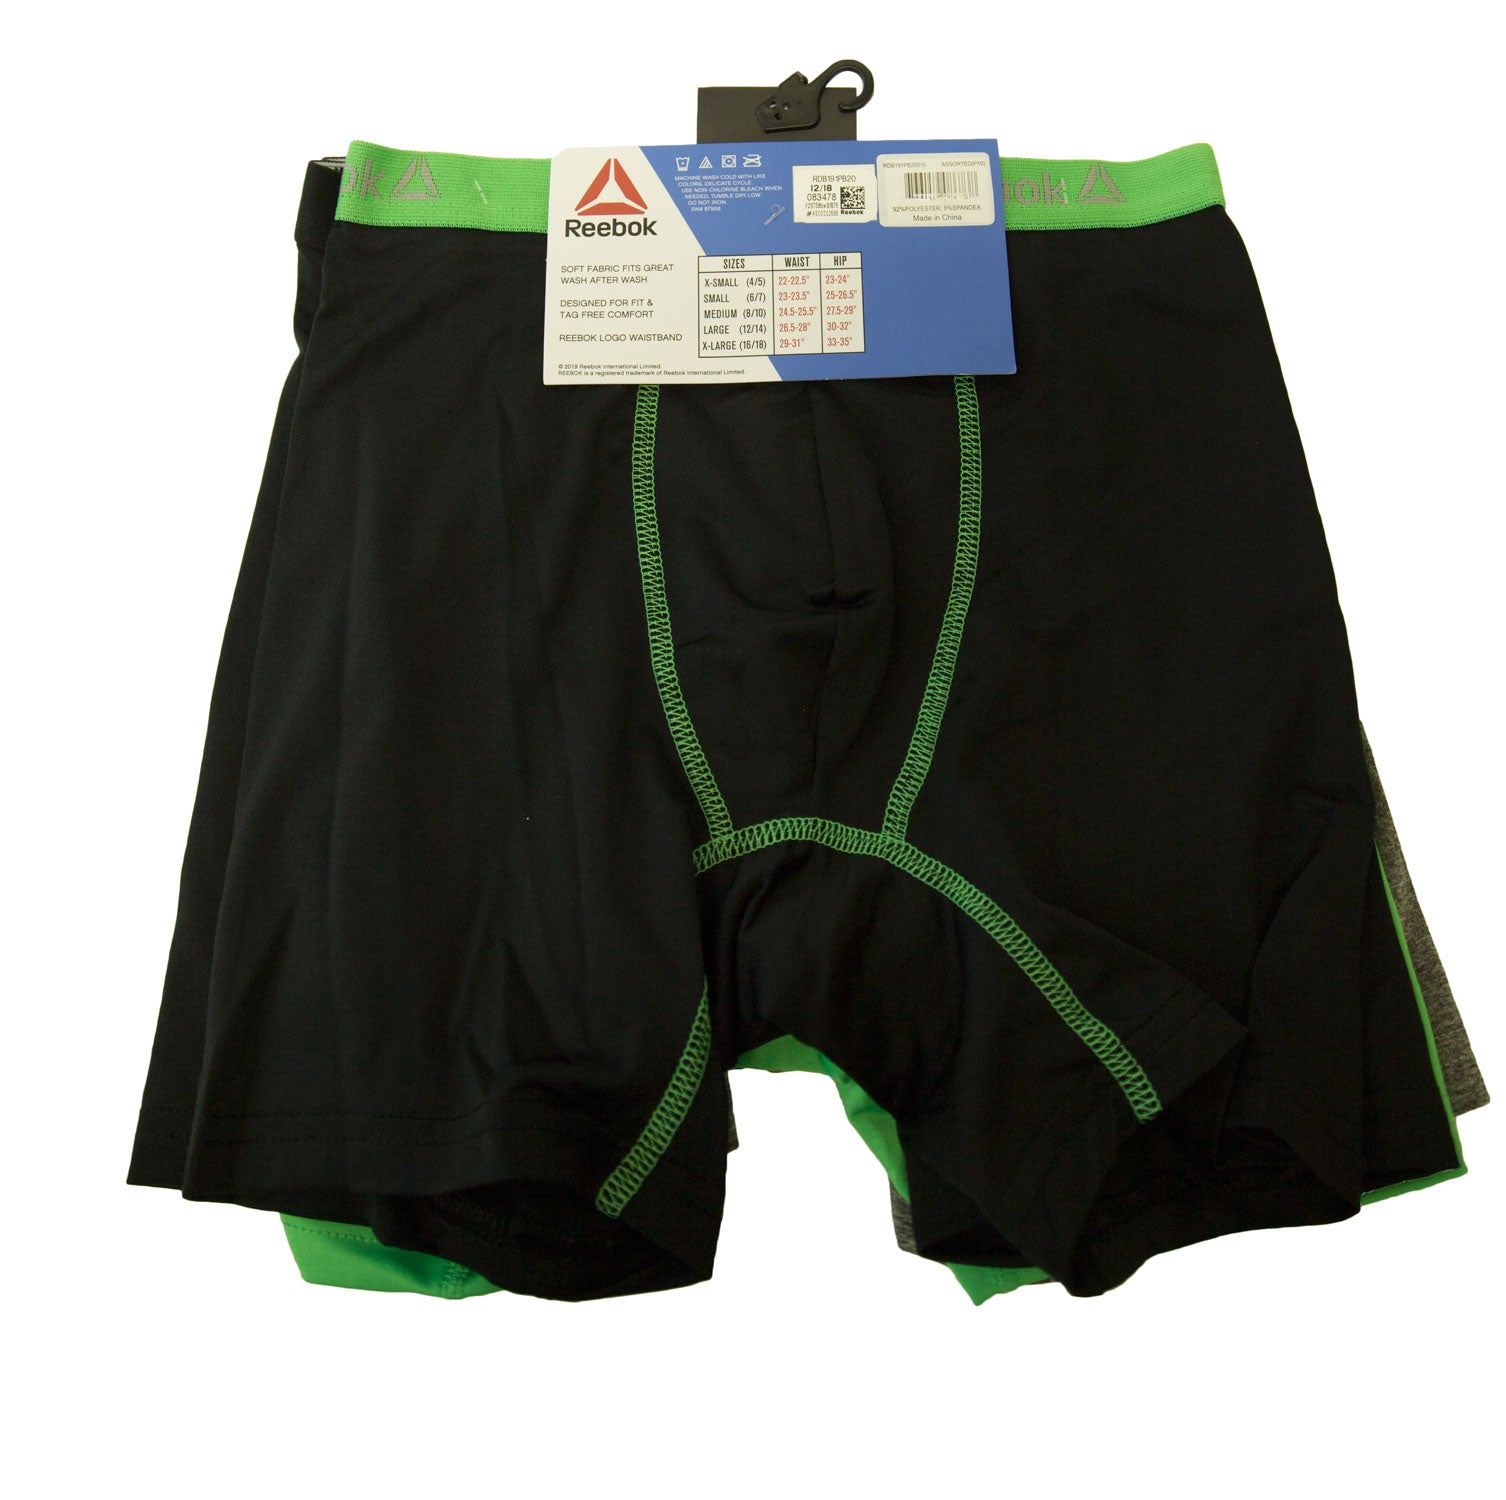 Performance Short With Built-In Brief 3 Pack